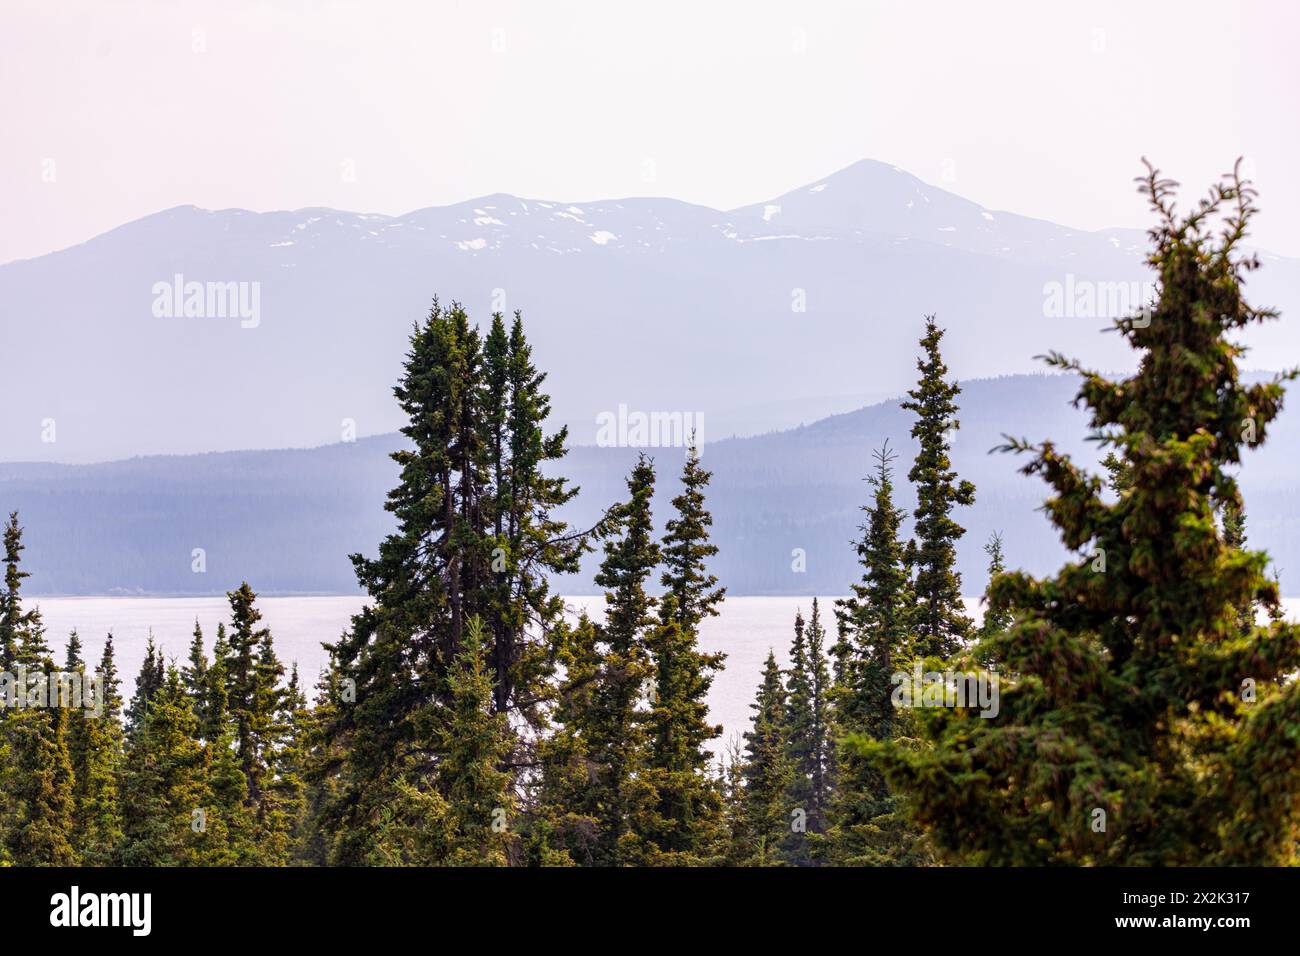 Wilderness of the boreal forest in northern Canada, Yukon Territory during summer time with poplar and birch trees. Overlooking mountain landscape. Stock Photo